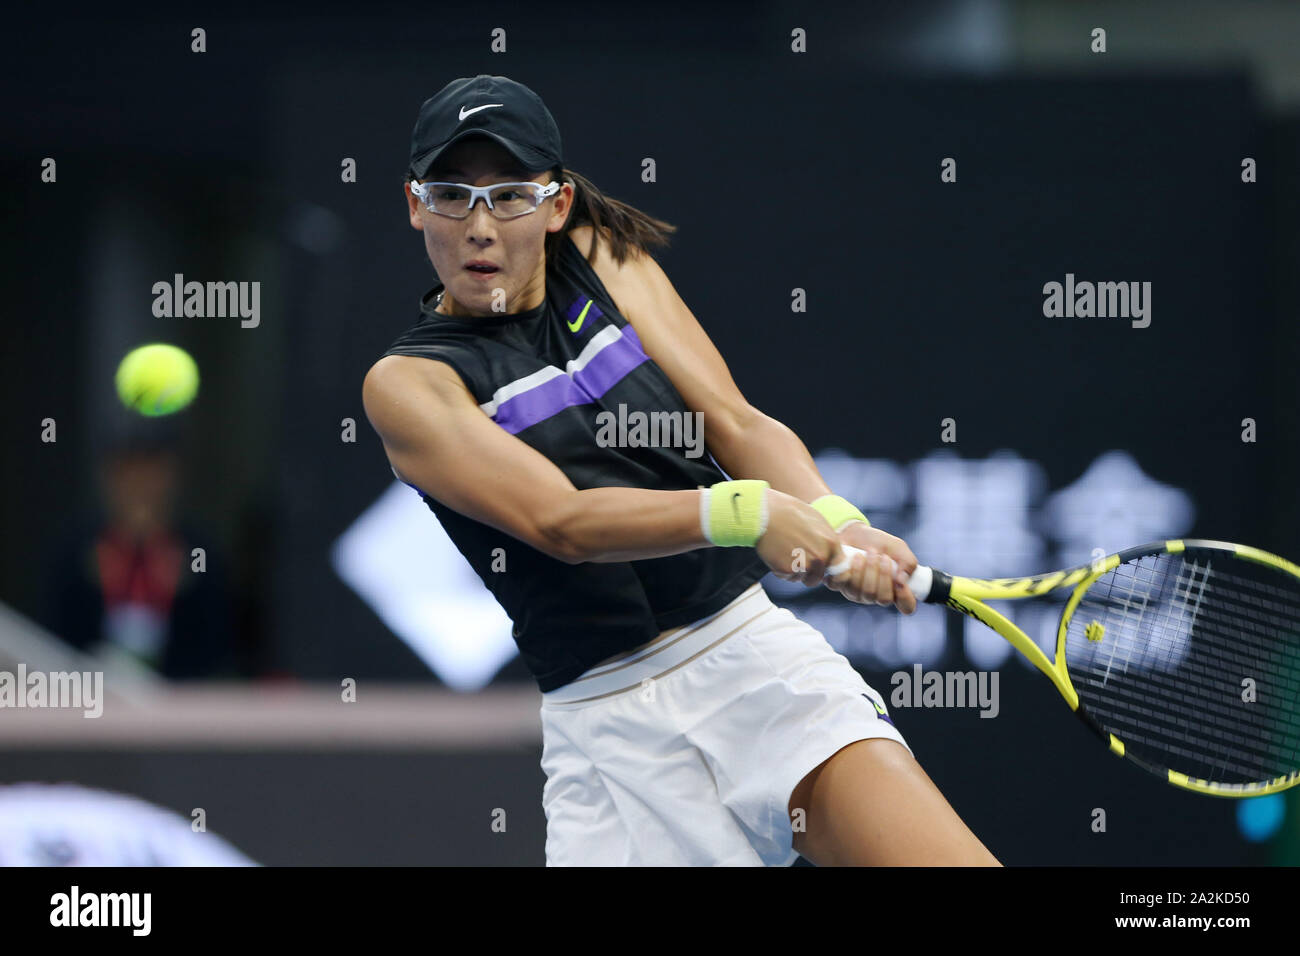 Chinese professional tennis player Zheng Saisai competes against American  professional tennis player Sloane Stephens at the second round of WTA 2019  China Open (Tennis), in Beijing, China, 1 October 2019. Chinese professional